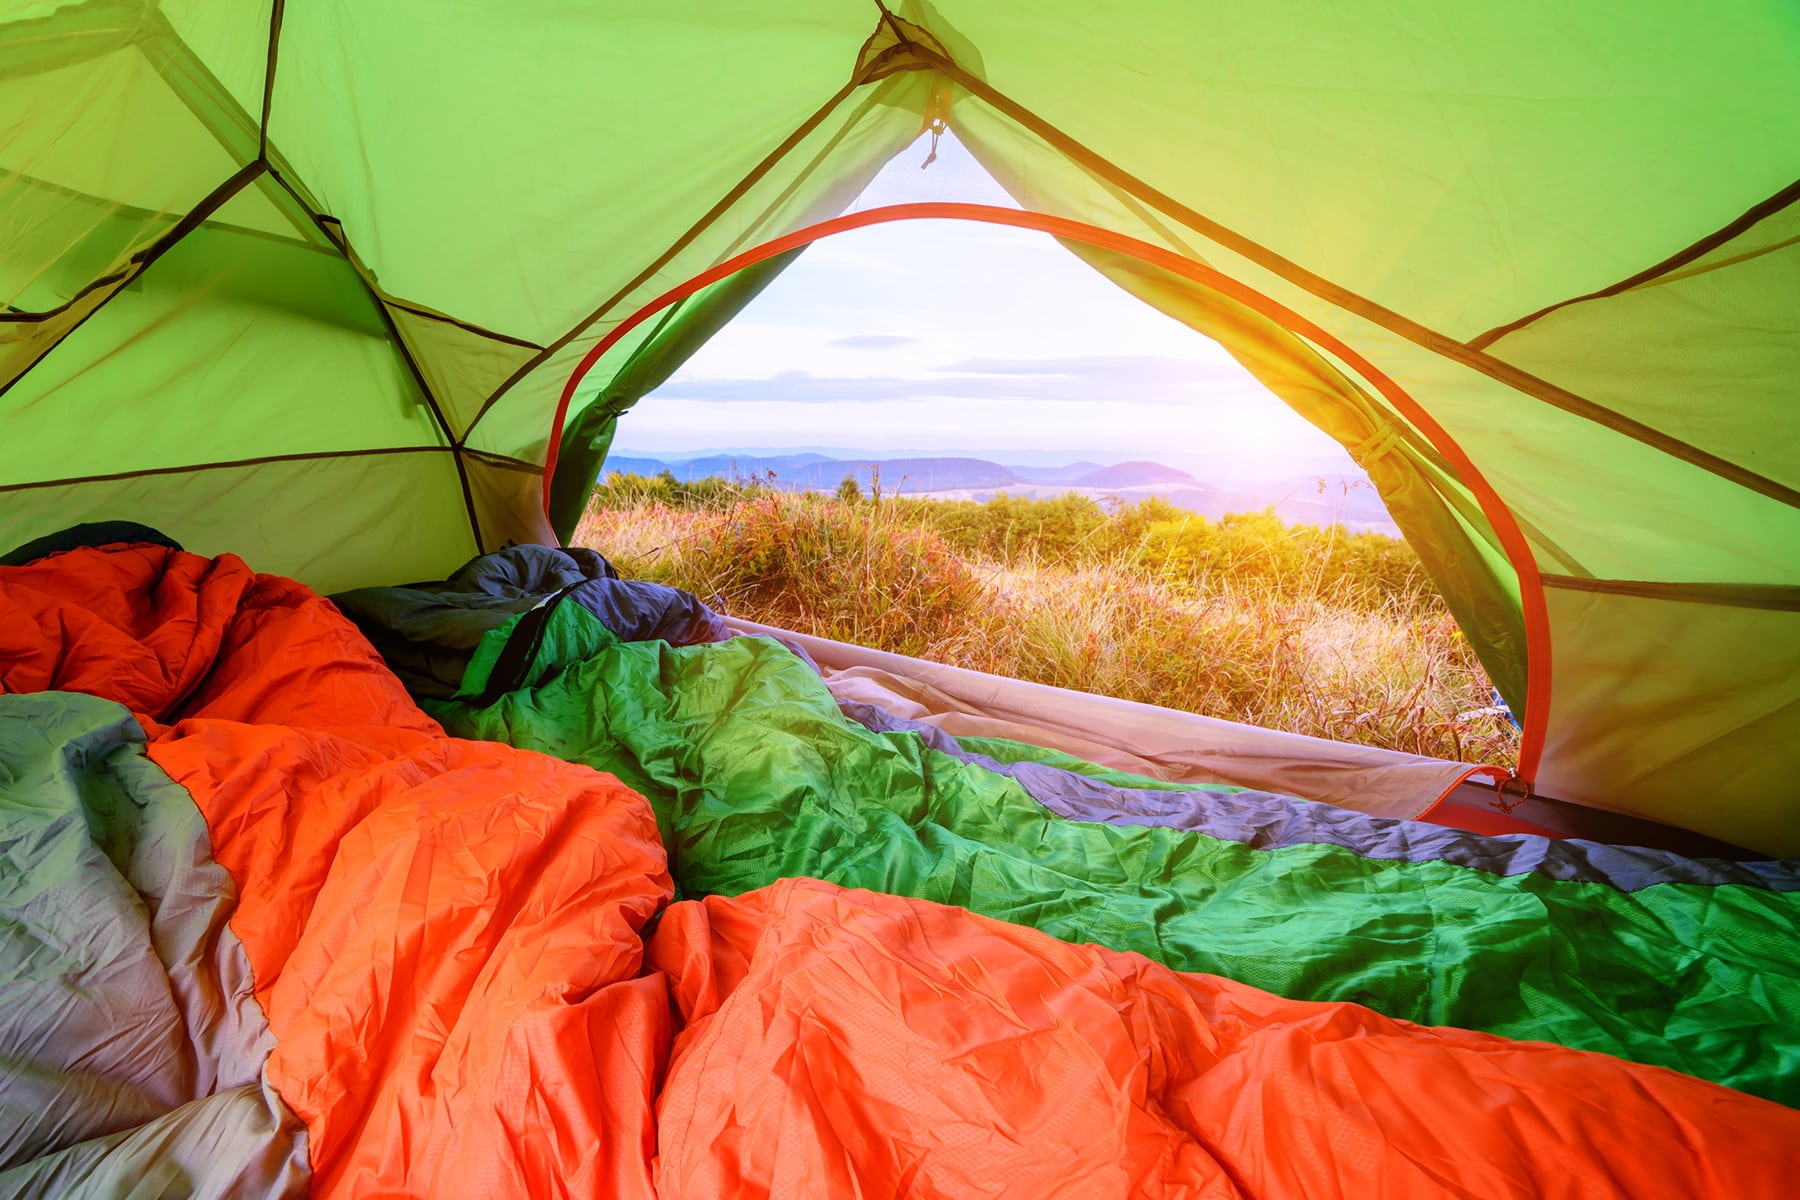 This is the cover photo for our Best Sleeping Bags articles. It features orange and green sleeping bags inside a green tent, with the front flap open to a scenic view outside.